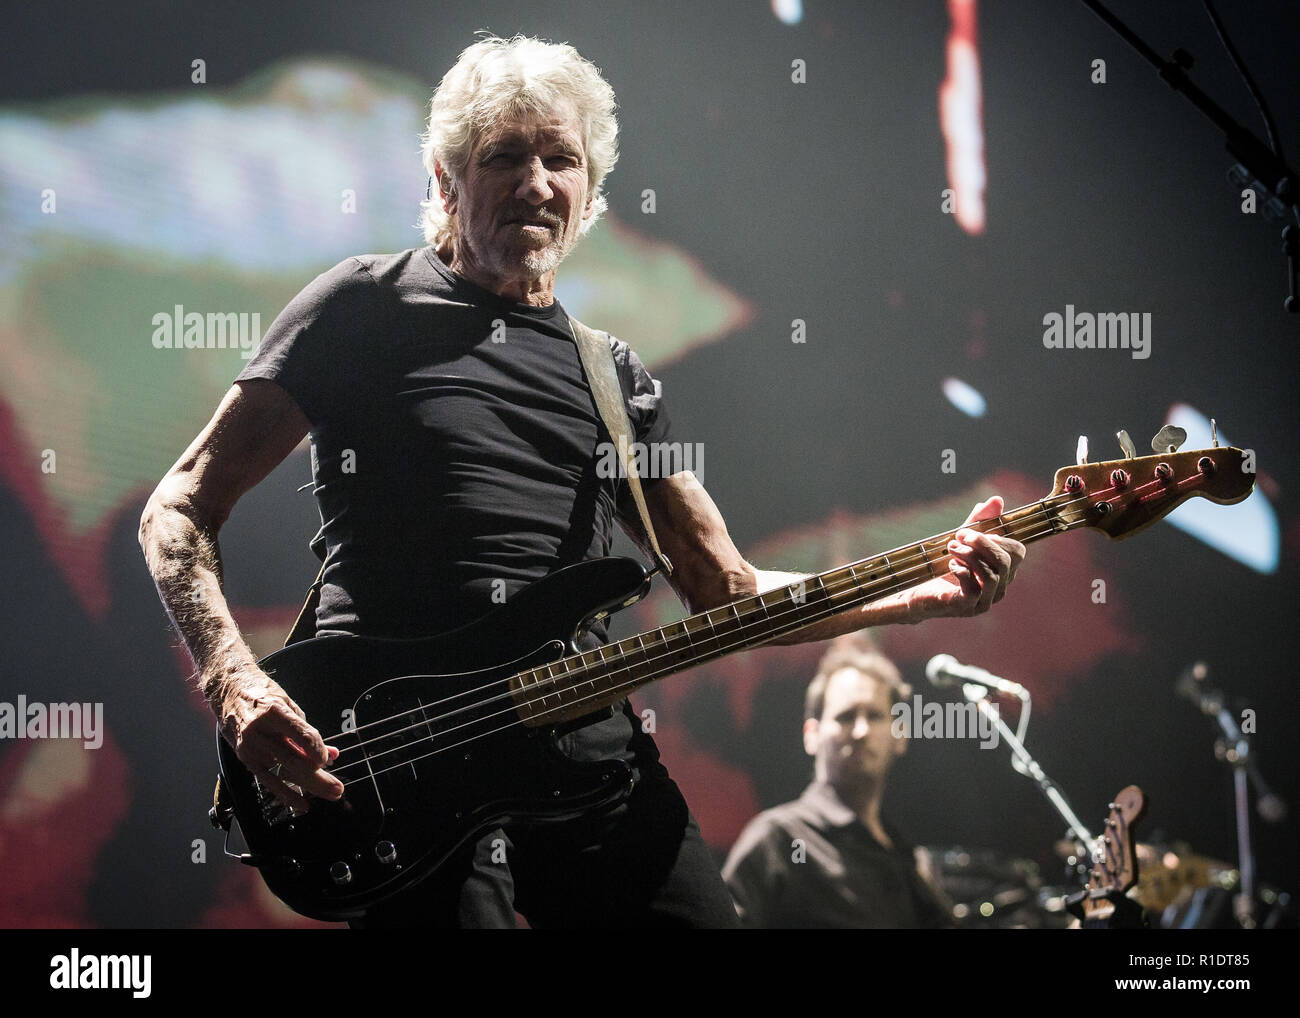 Roger Waters of Pink Floyd performing a concert in Oslo Telenor Arena on 14 August 2018 Stock Photo